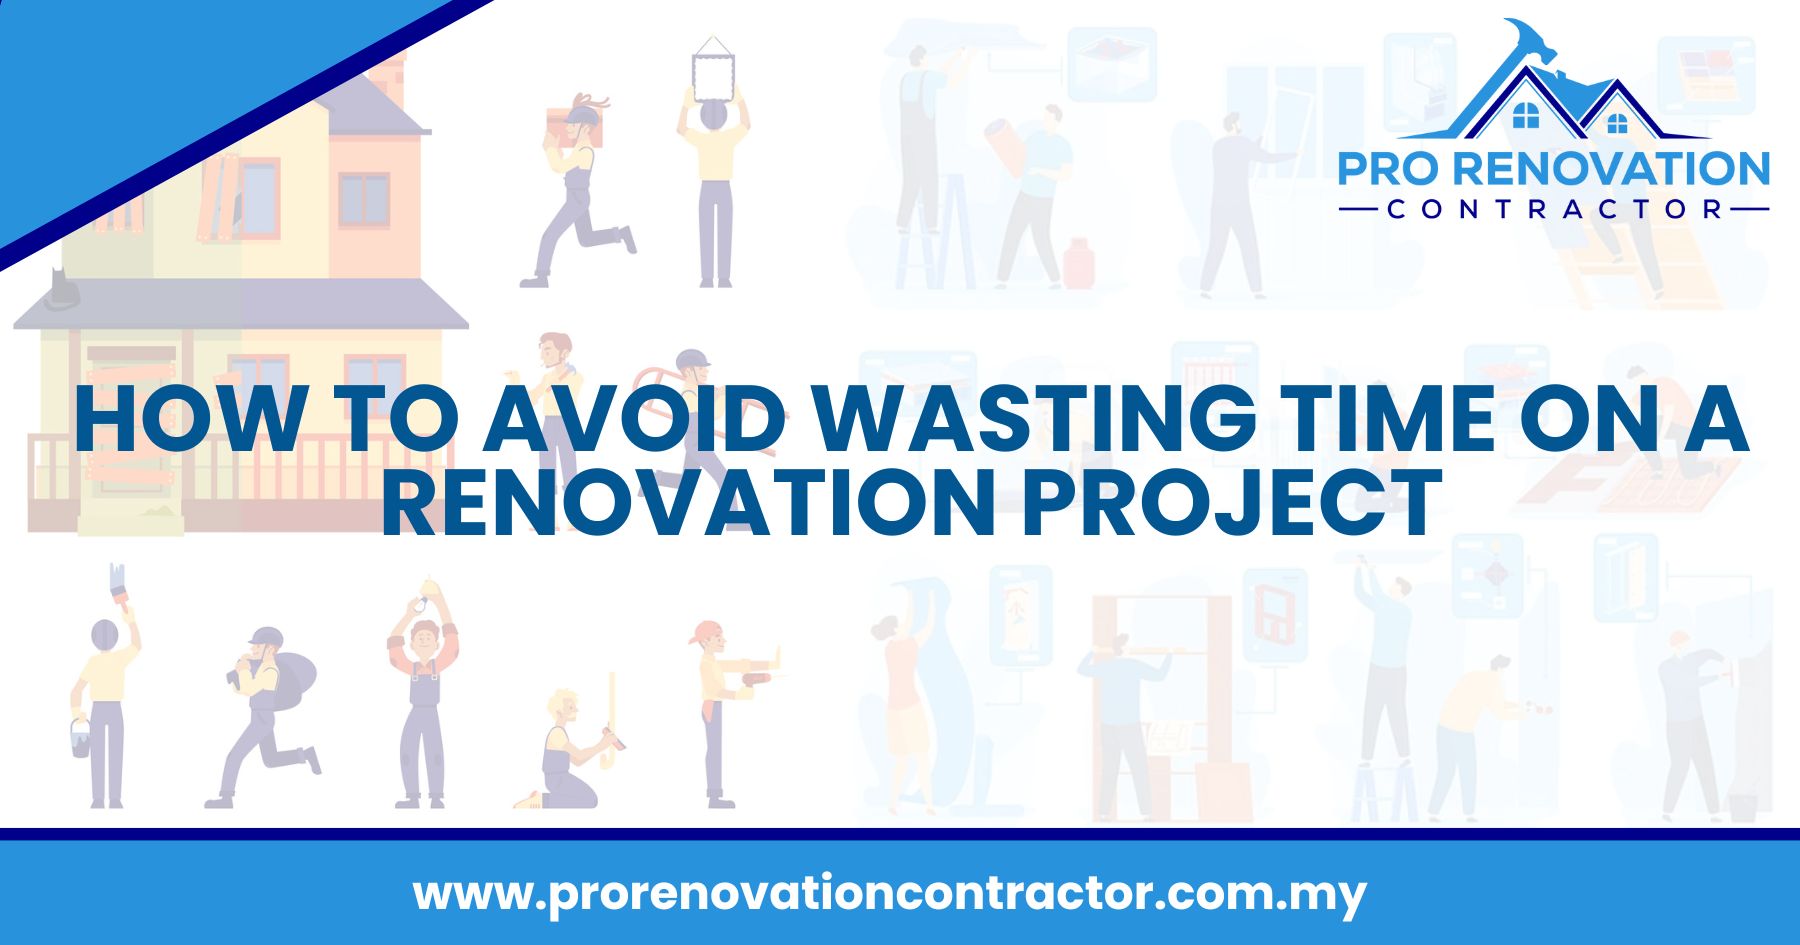 How to Avoid Wasting Time on a Renovation Project